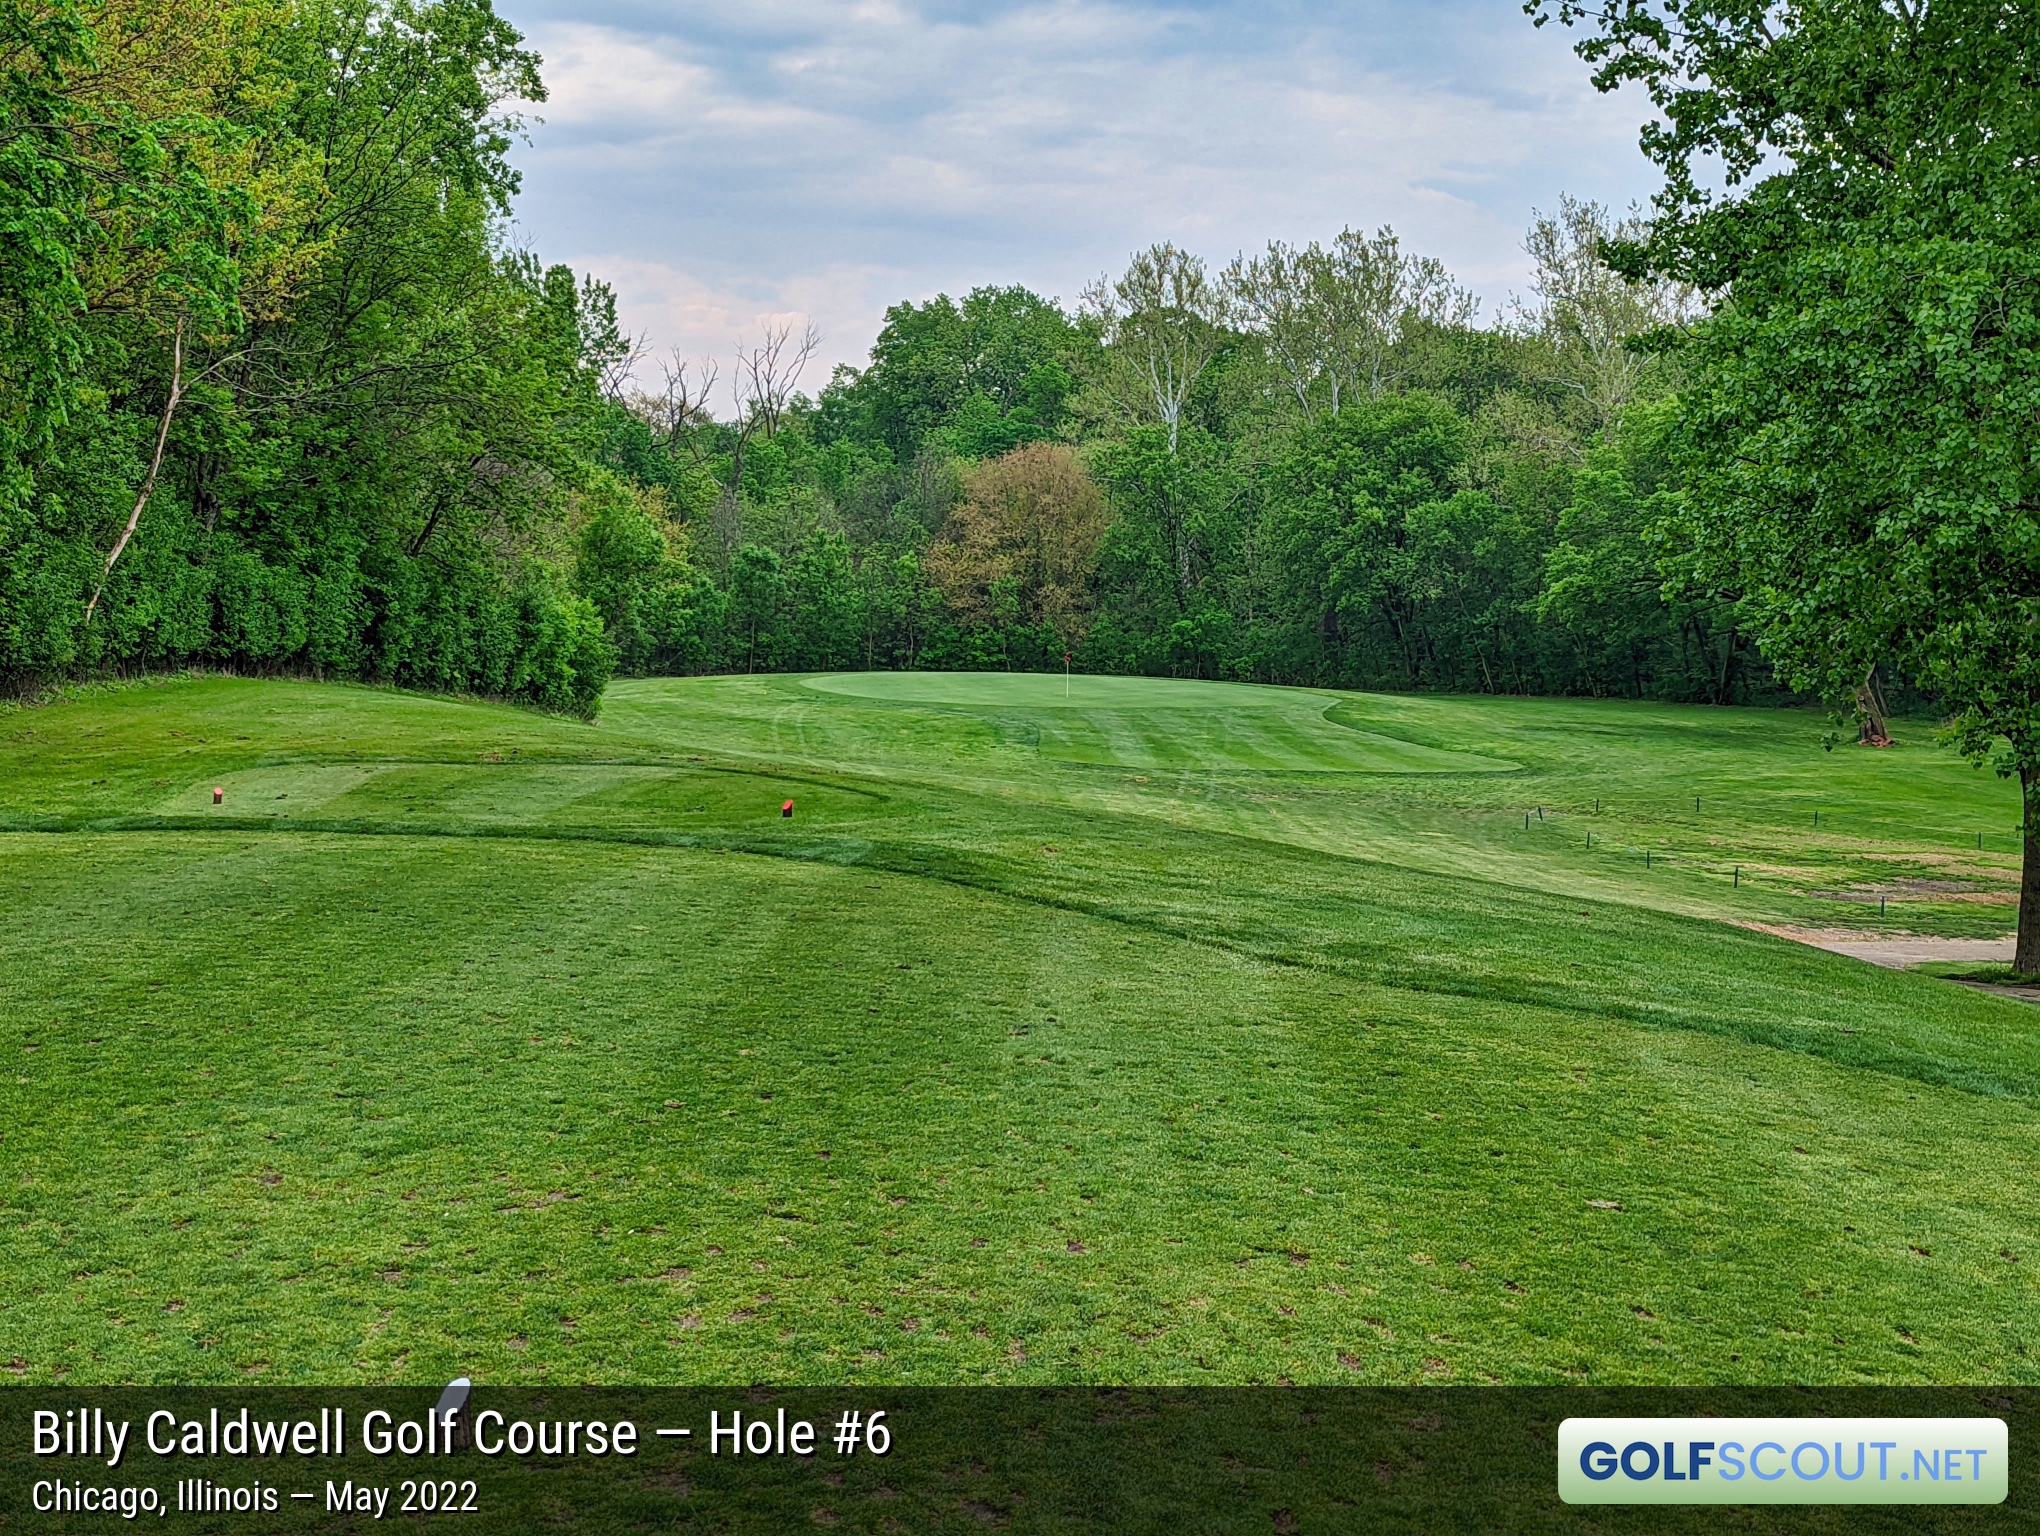 Photo of hole #6 at Billy Caldwell Golf Course in Chicago, Illinois. 